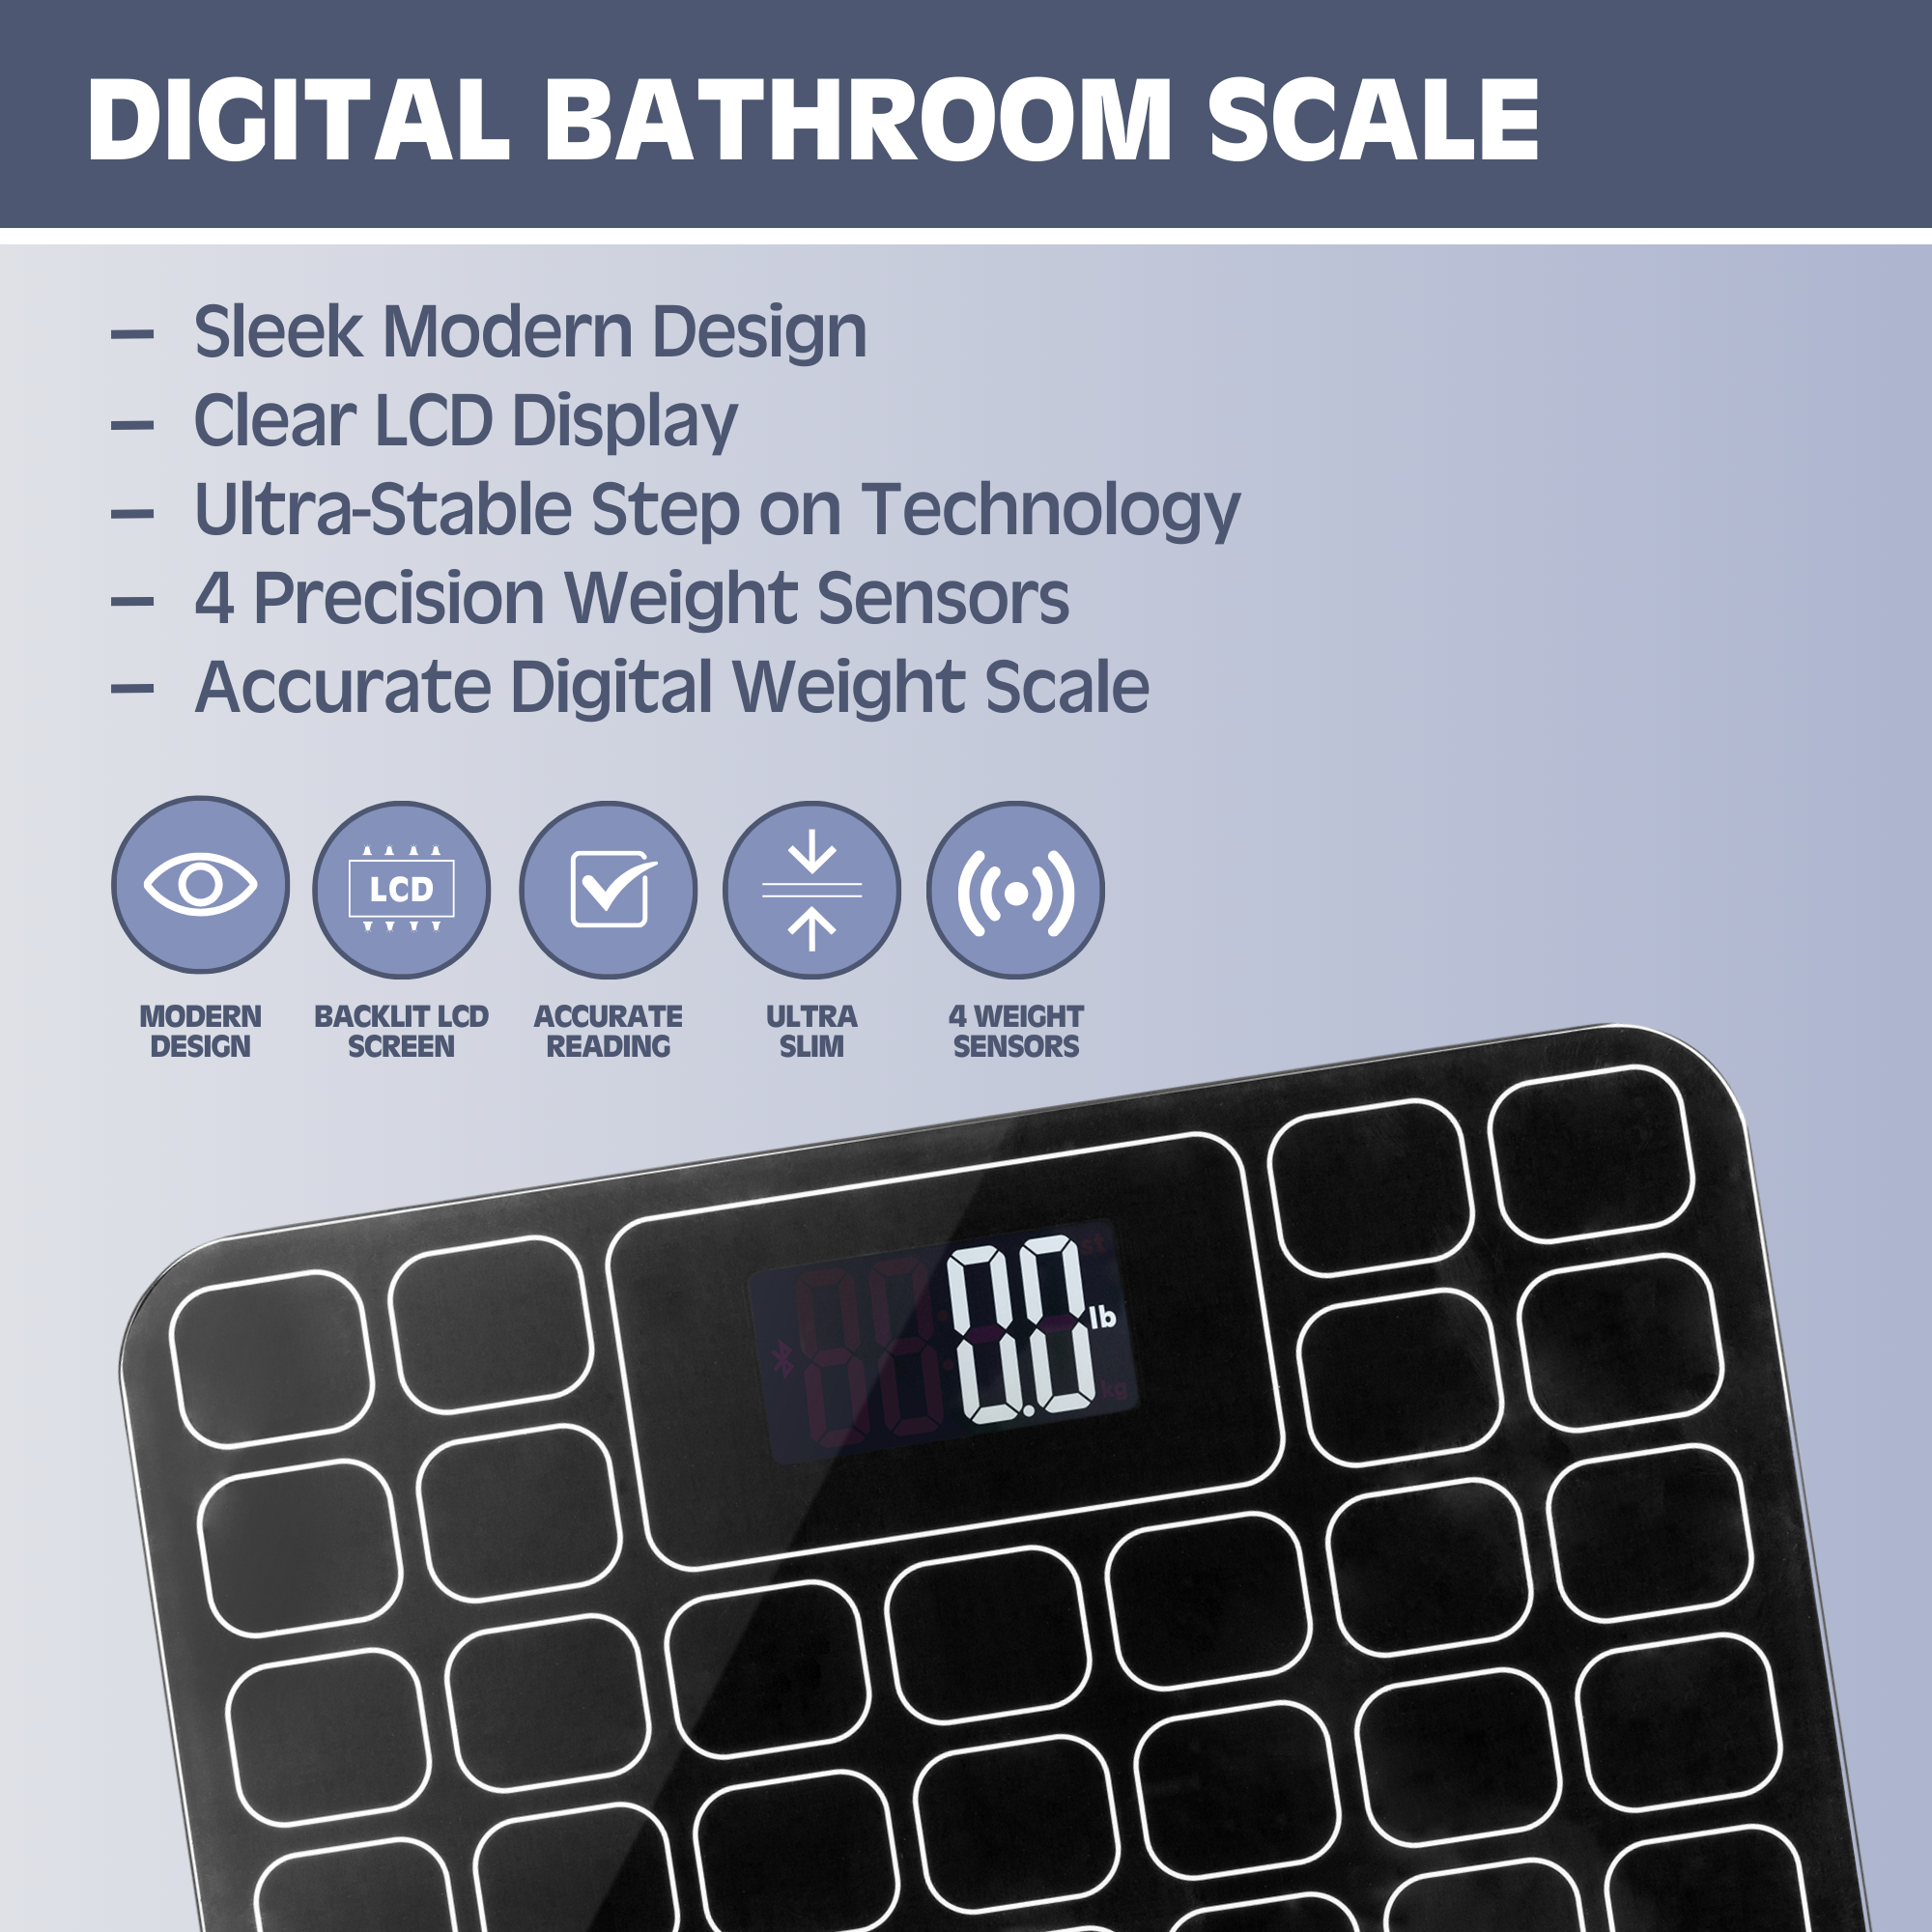 Prominence Home Digital Bathroom Scale for Body Weight, Auto Step-On Design, Ultra Thin - White - Glass